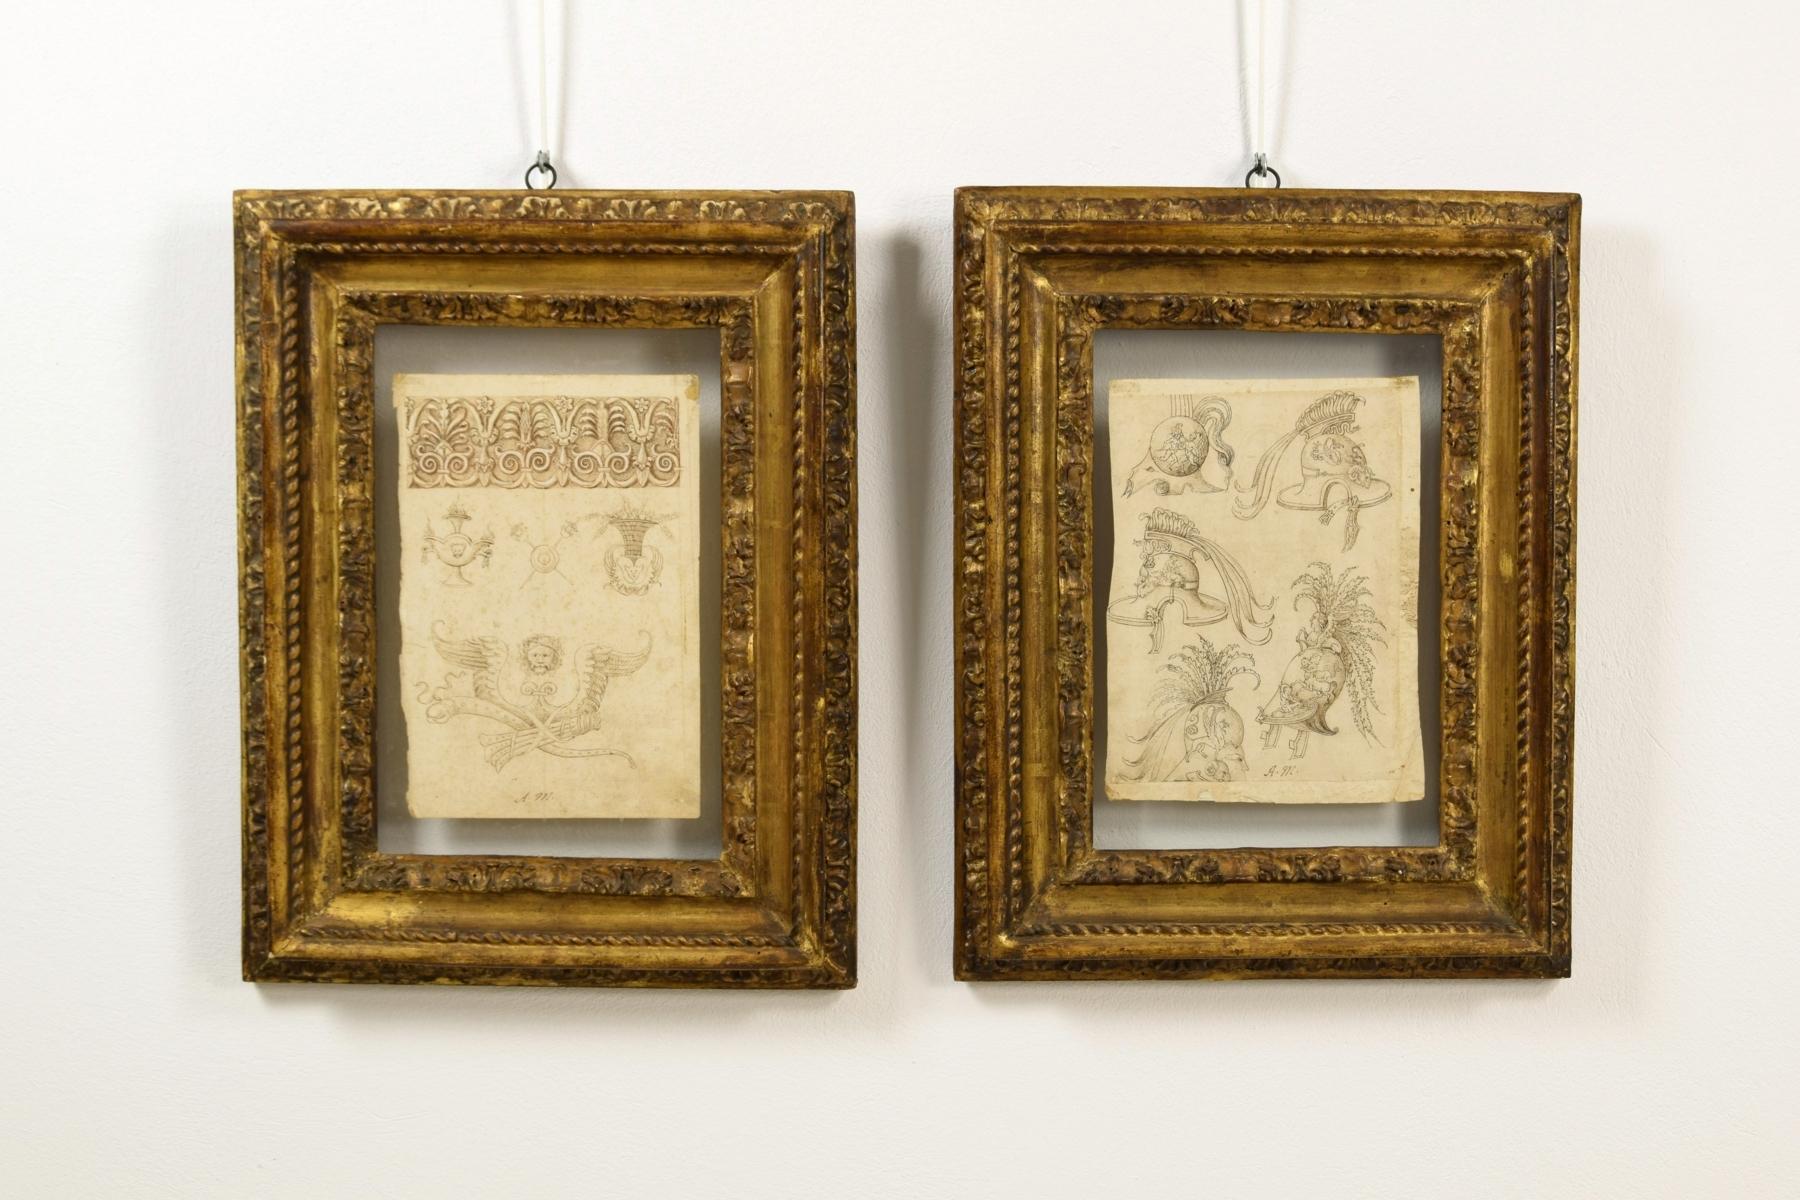 17th century, pair of ink drawings on paper with studies for grotesques, friezes and helmets.

Painter of central Italy of the 17th century, signed with monogram “A.M.”.

Measurements: cm L 45.5 x H 59.5 x 5.5; cm 22 x 33 / cm L 46.5 x H 59 x